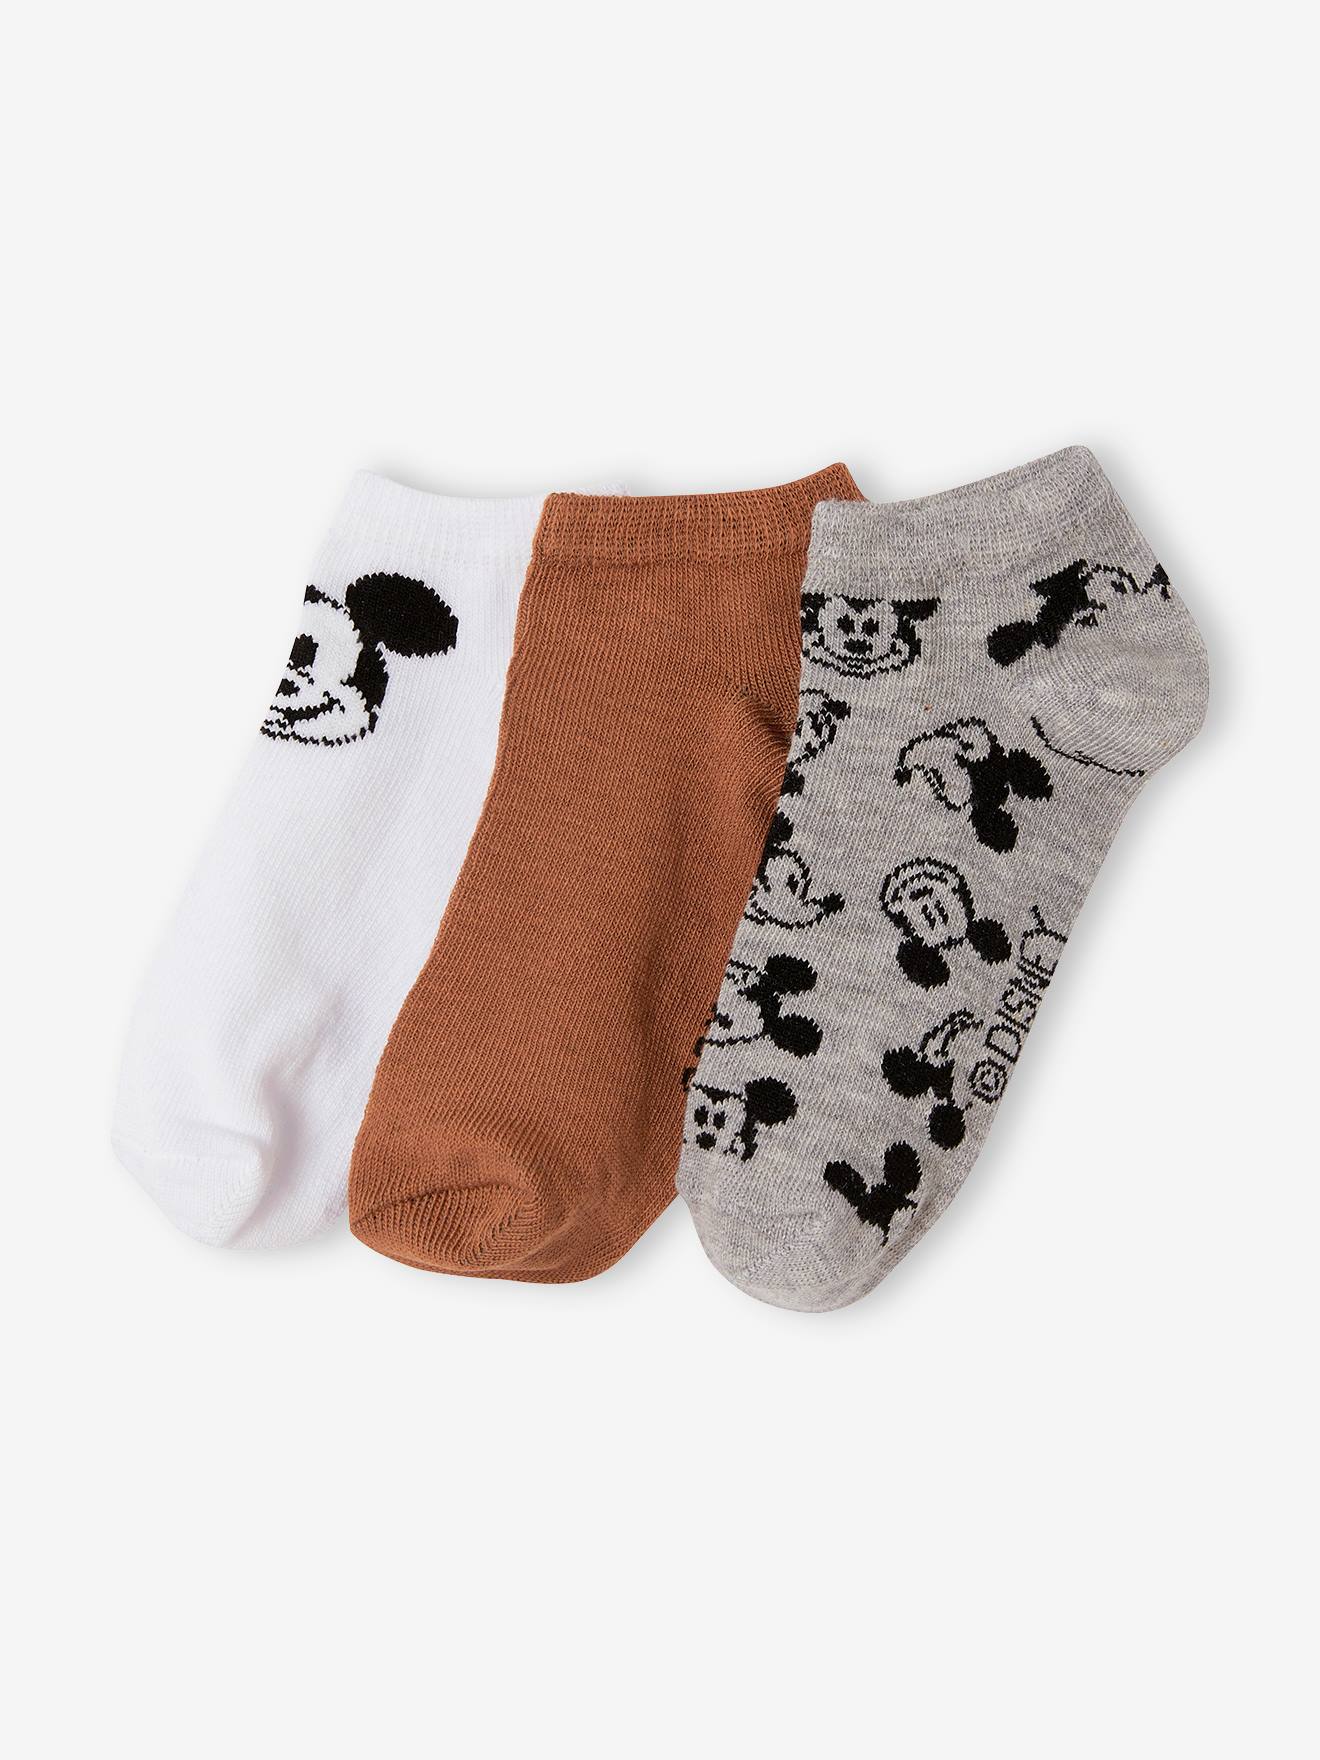 Pack of 3 Pairs of Mickey Mouse Trainer Socks by Disney(r) for Boys mustard